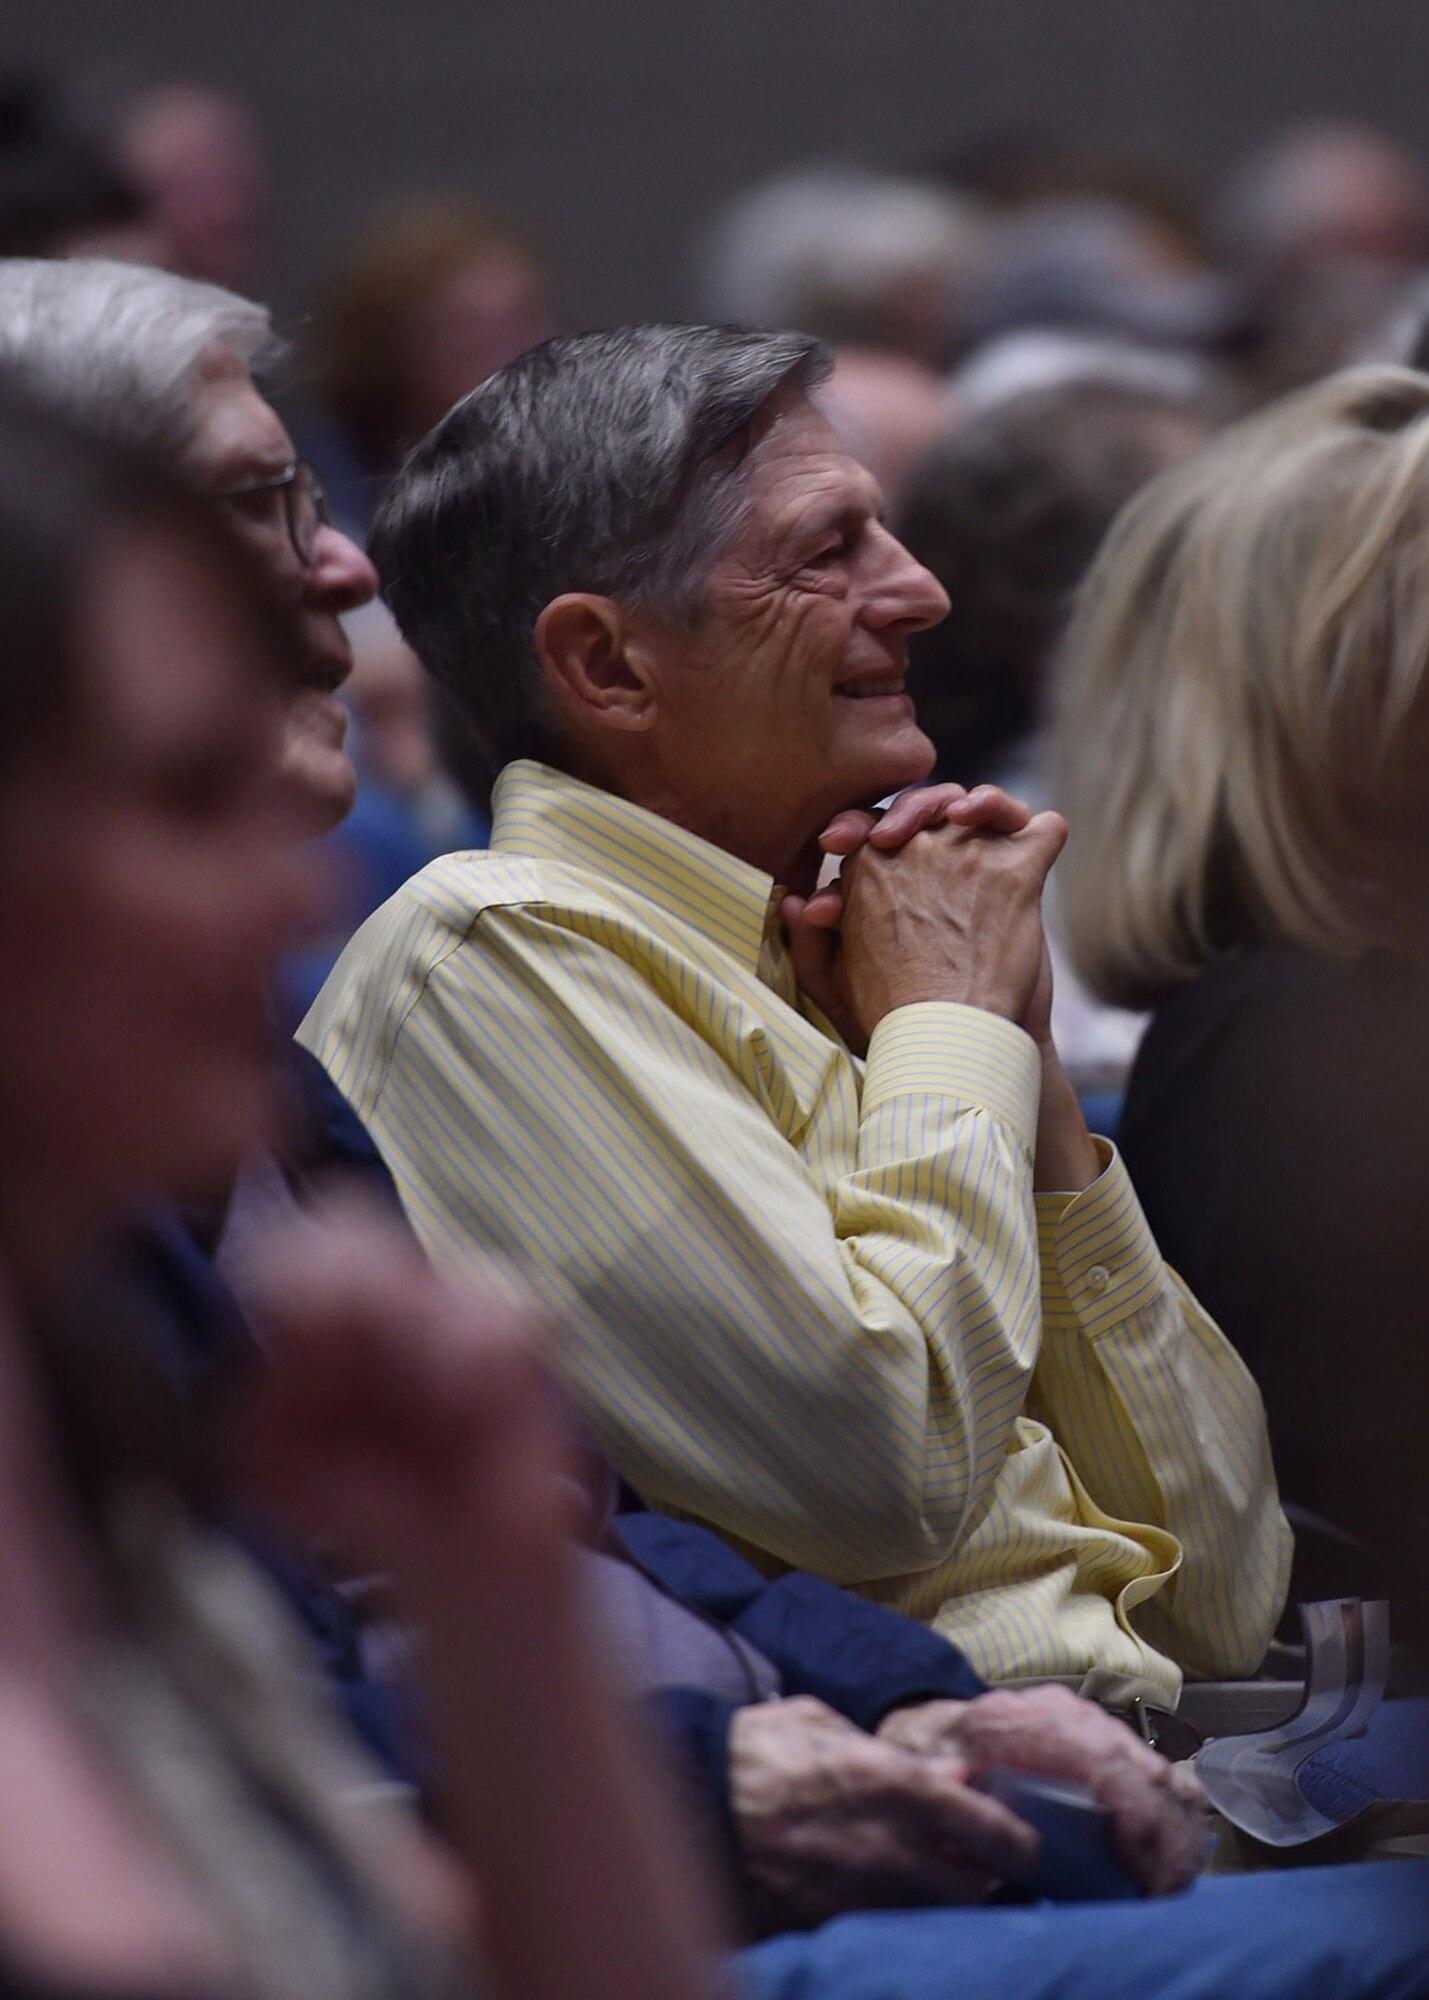 A member of the audience looks on during the U.S. Air Force Concert Band and Singing Sergeants performance at Conway High School in Conway, Ark., April 6, 2016. The bands performed across five states during a 12 day spring tour. (U.S. Air Force photo by Senior Airman Dylan Nuckolls/Released)